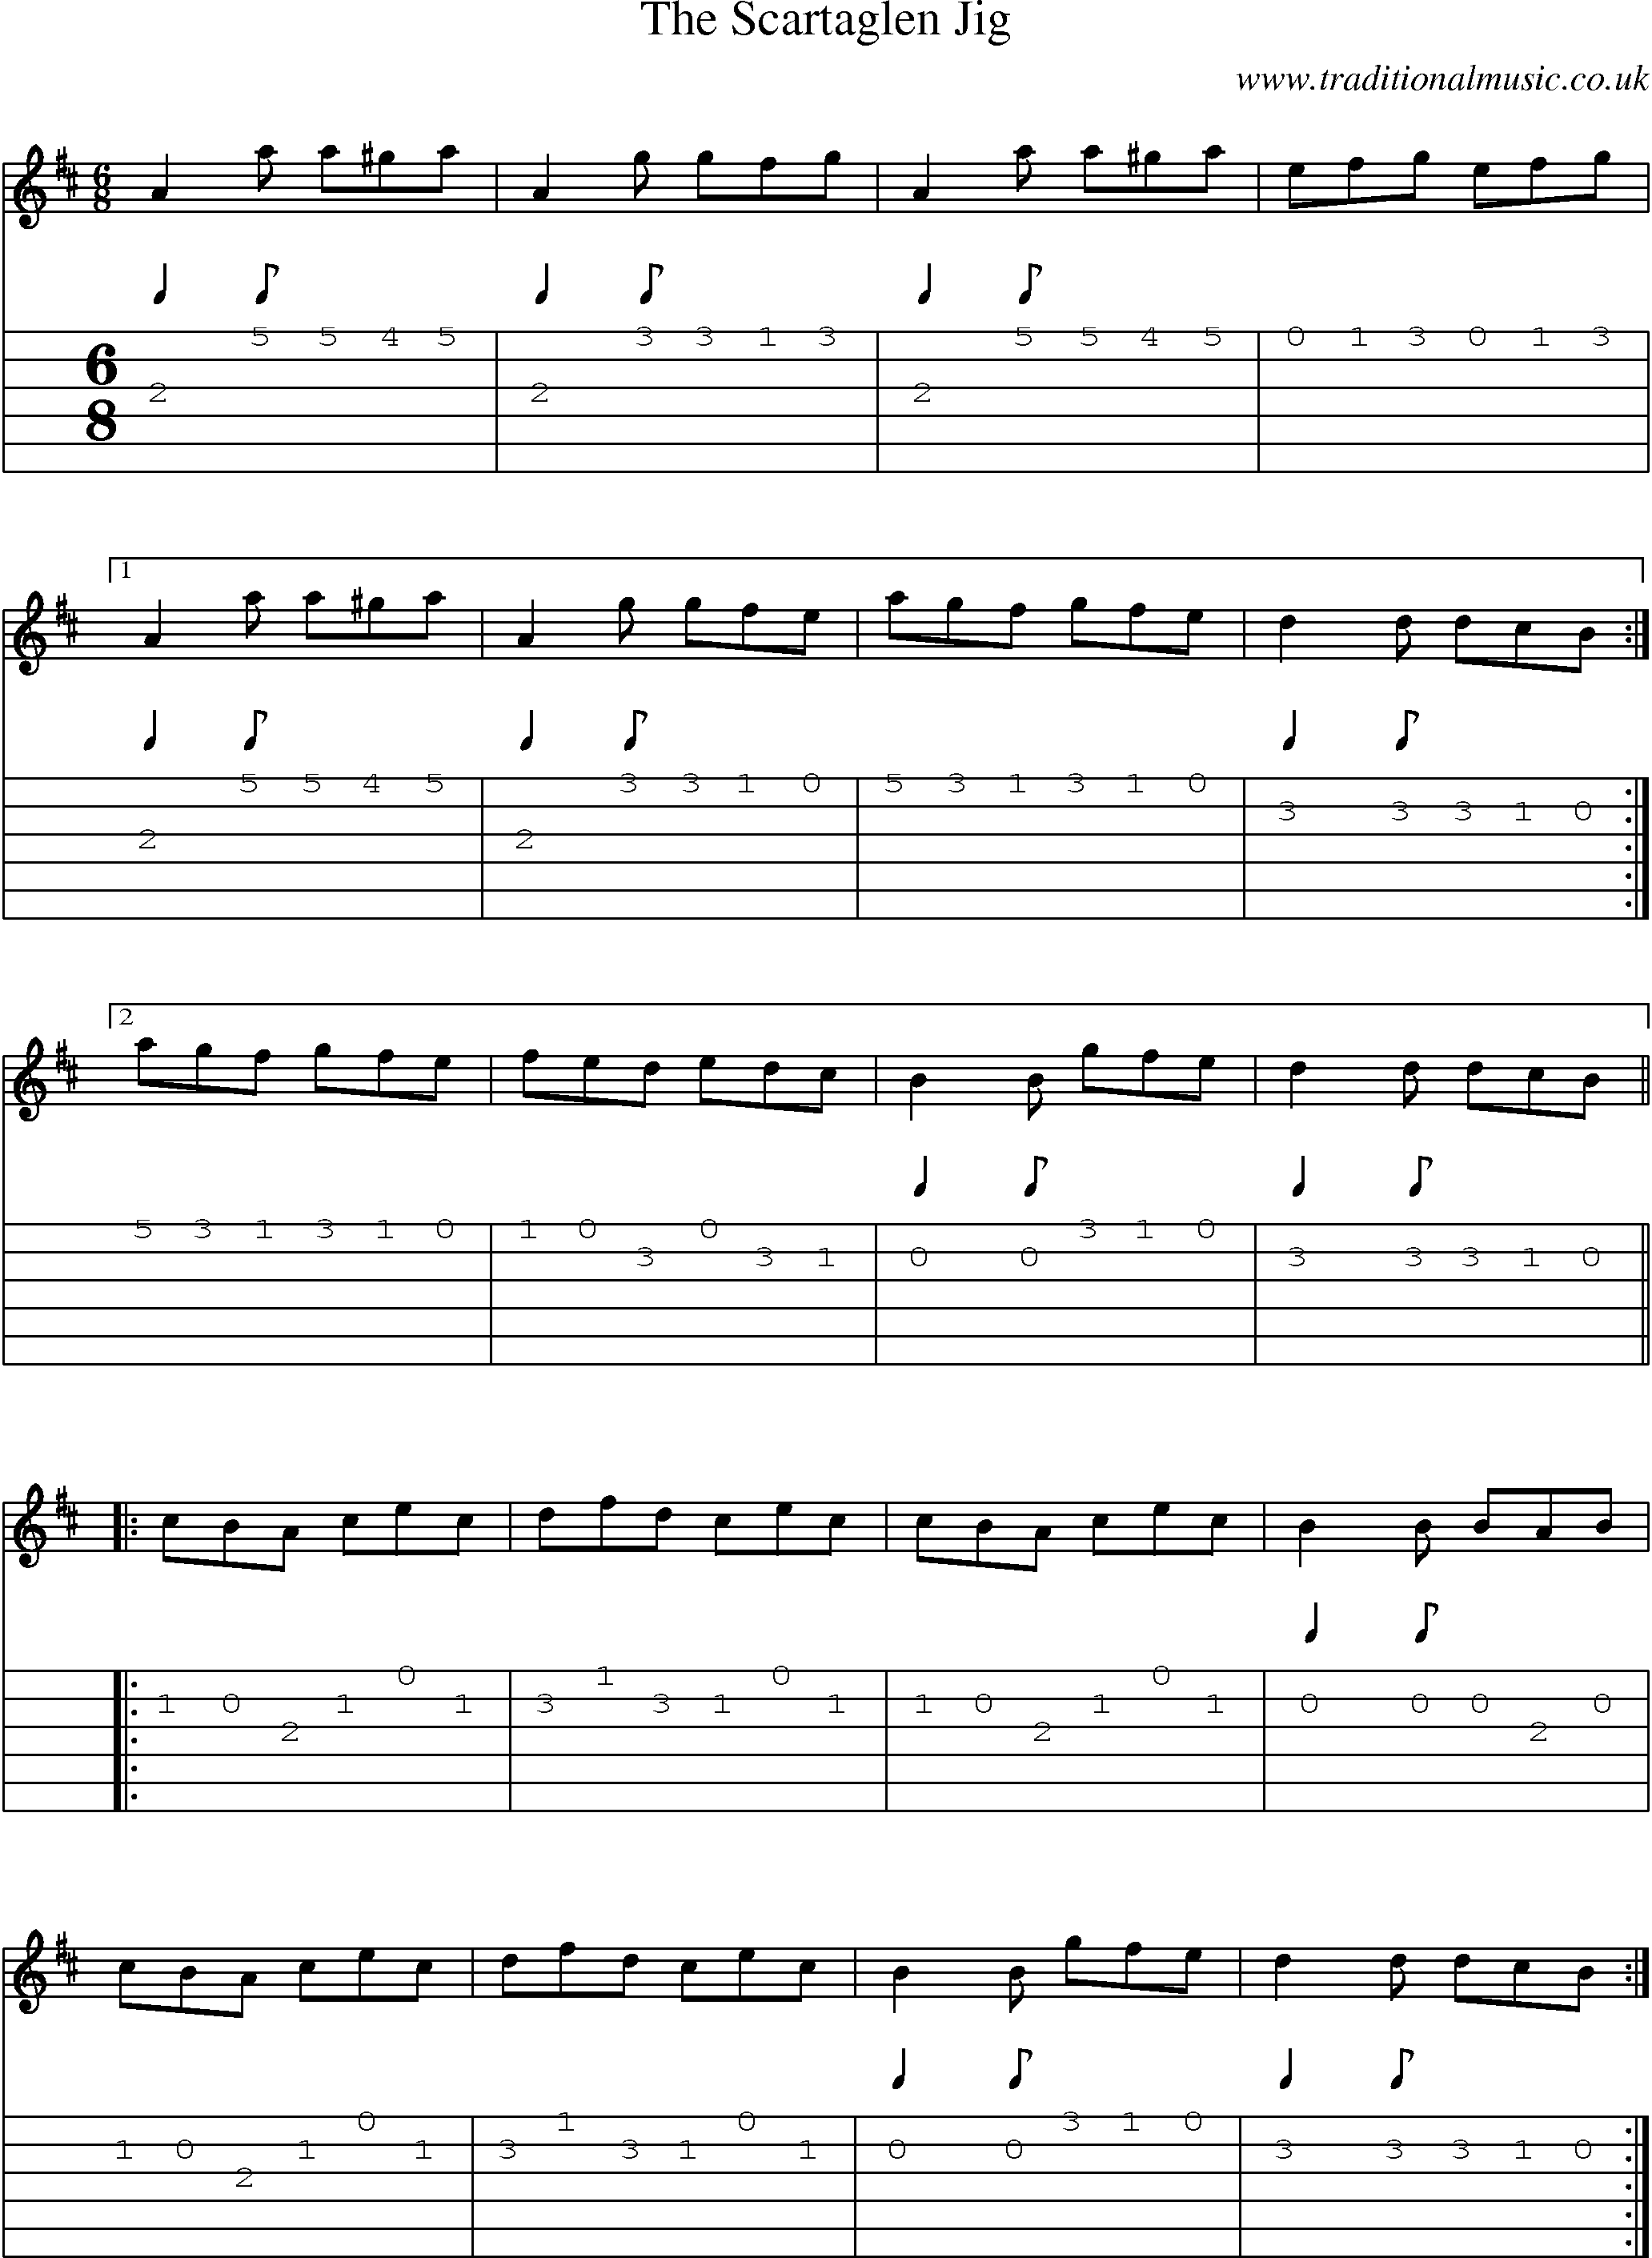 Music Score and Guitar Tabs for The Scartaglen Jig